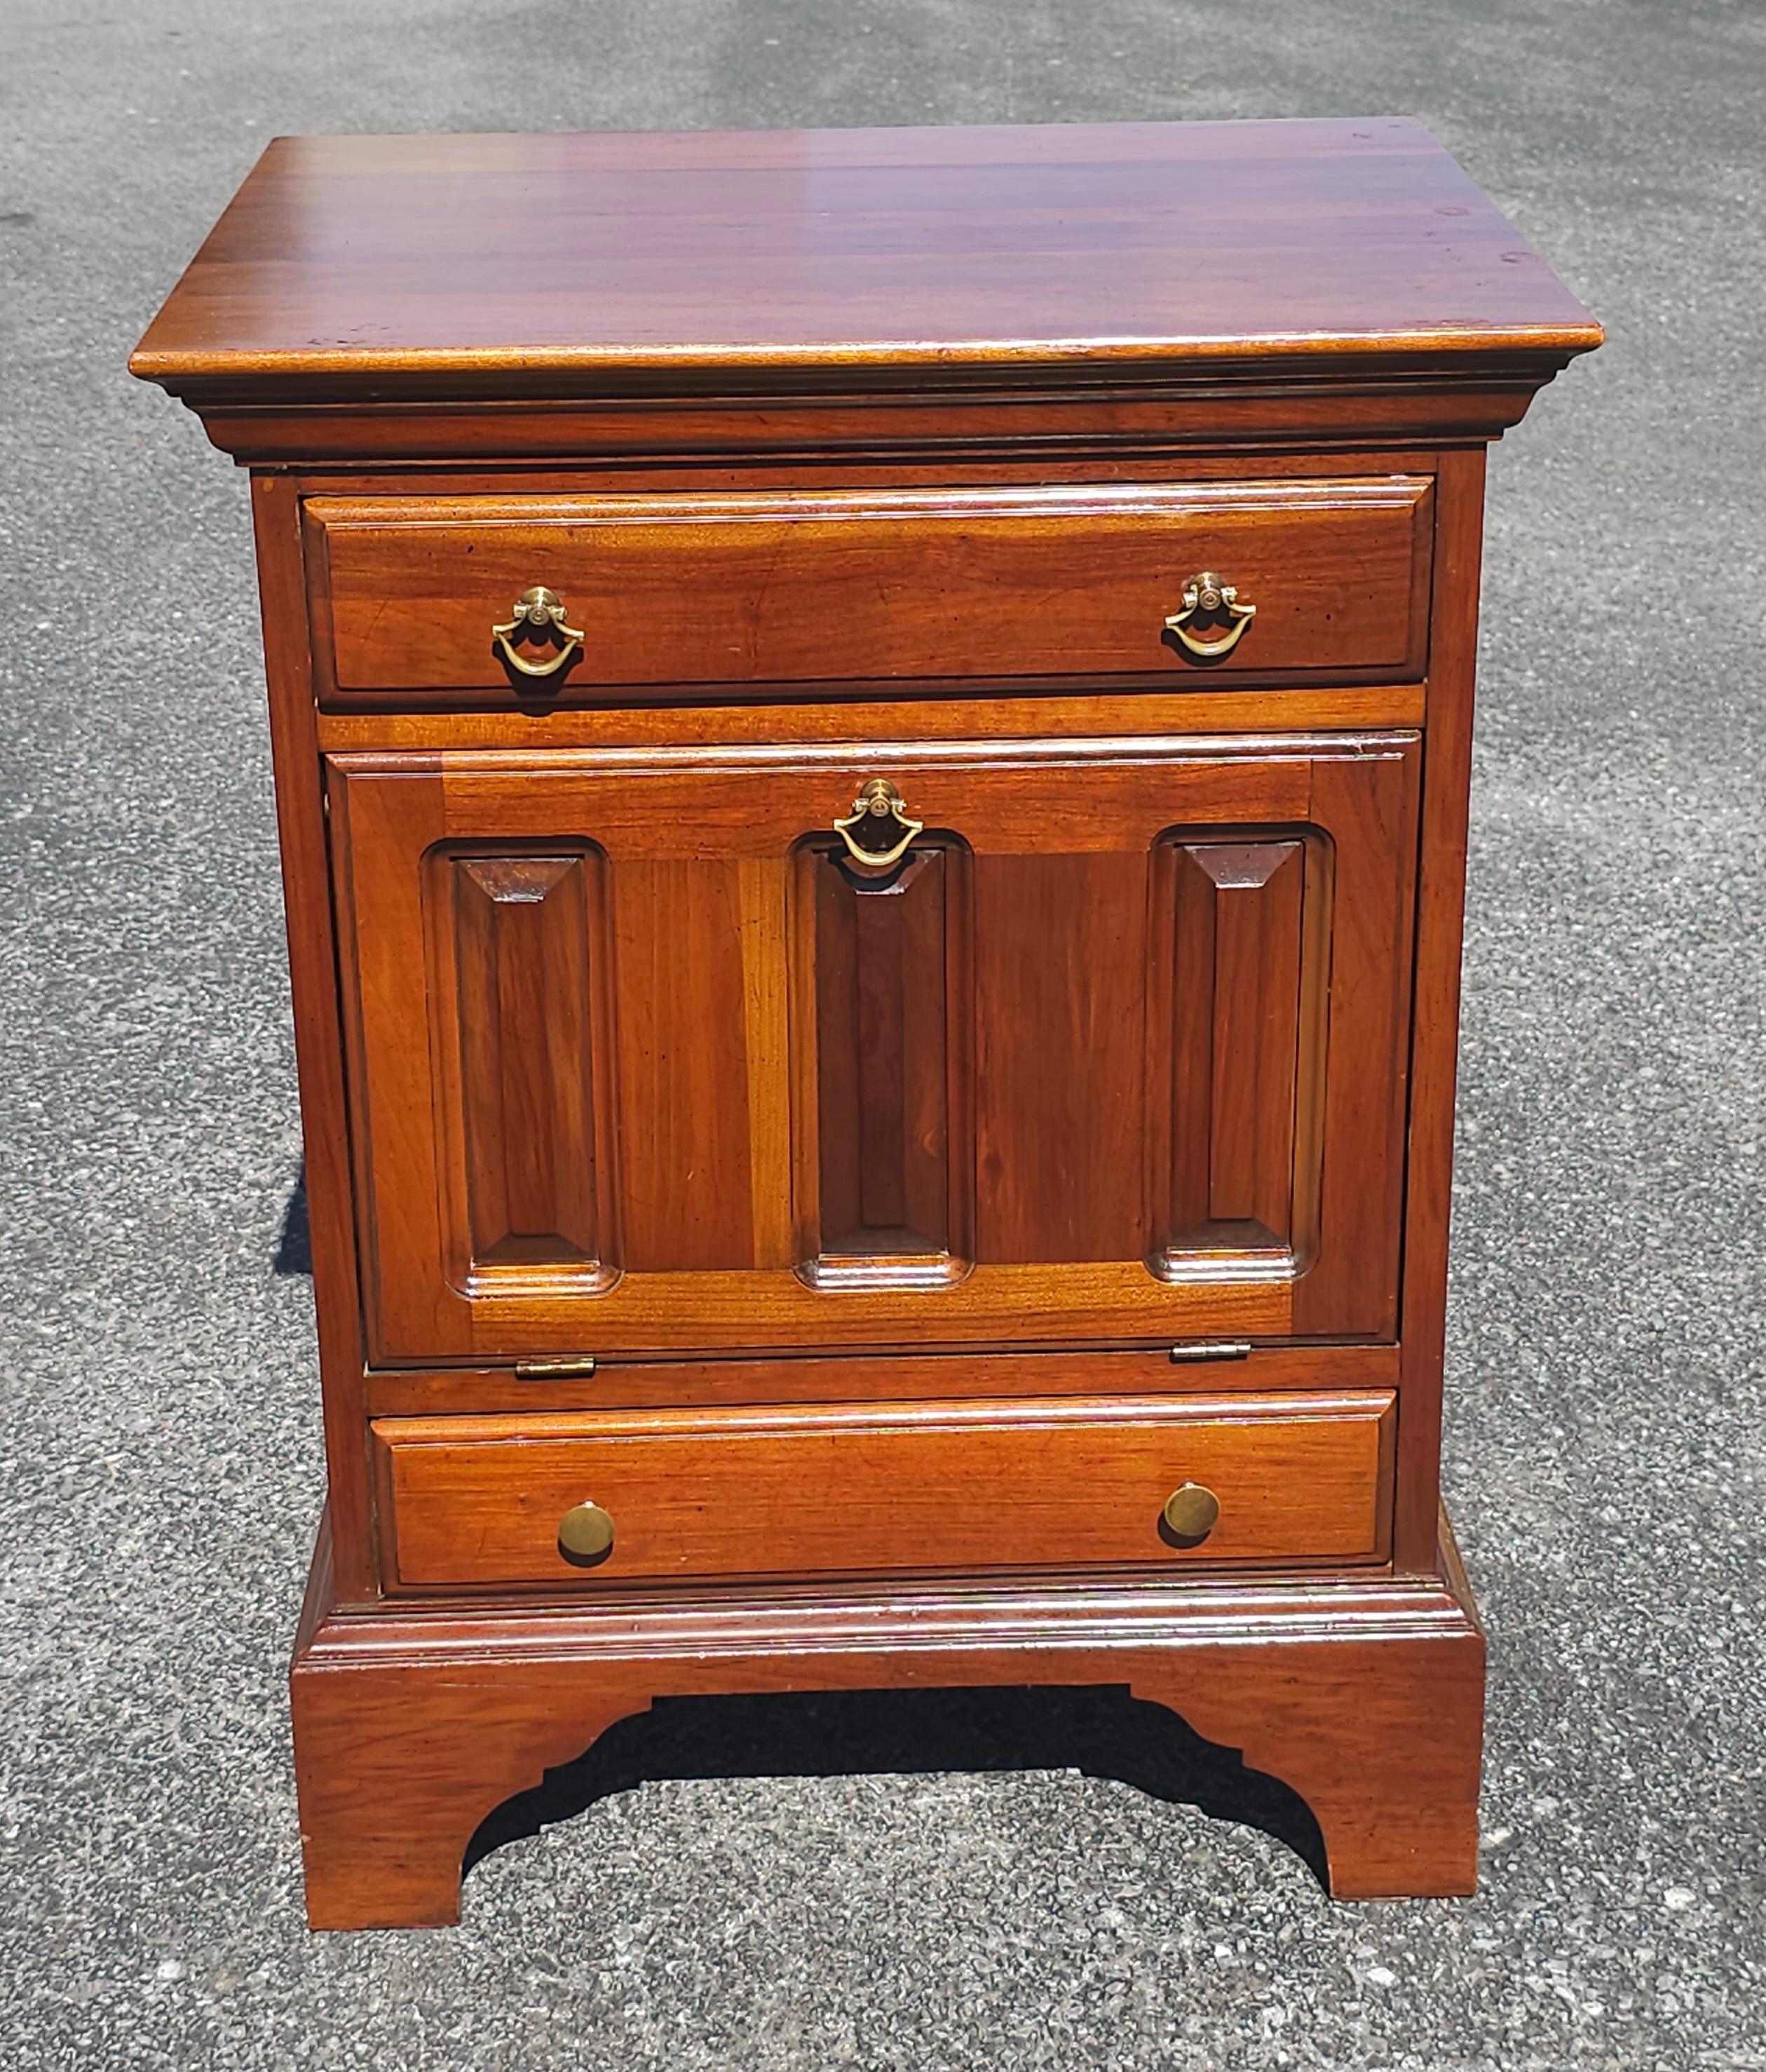 American 20th Century David Cabinet Cherry 2-Drawer a Abattant Door Bedside Cabinets Pair For Sale